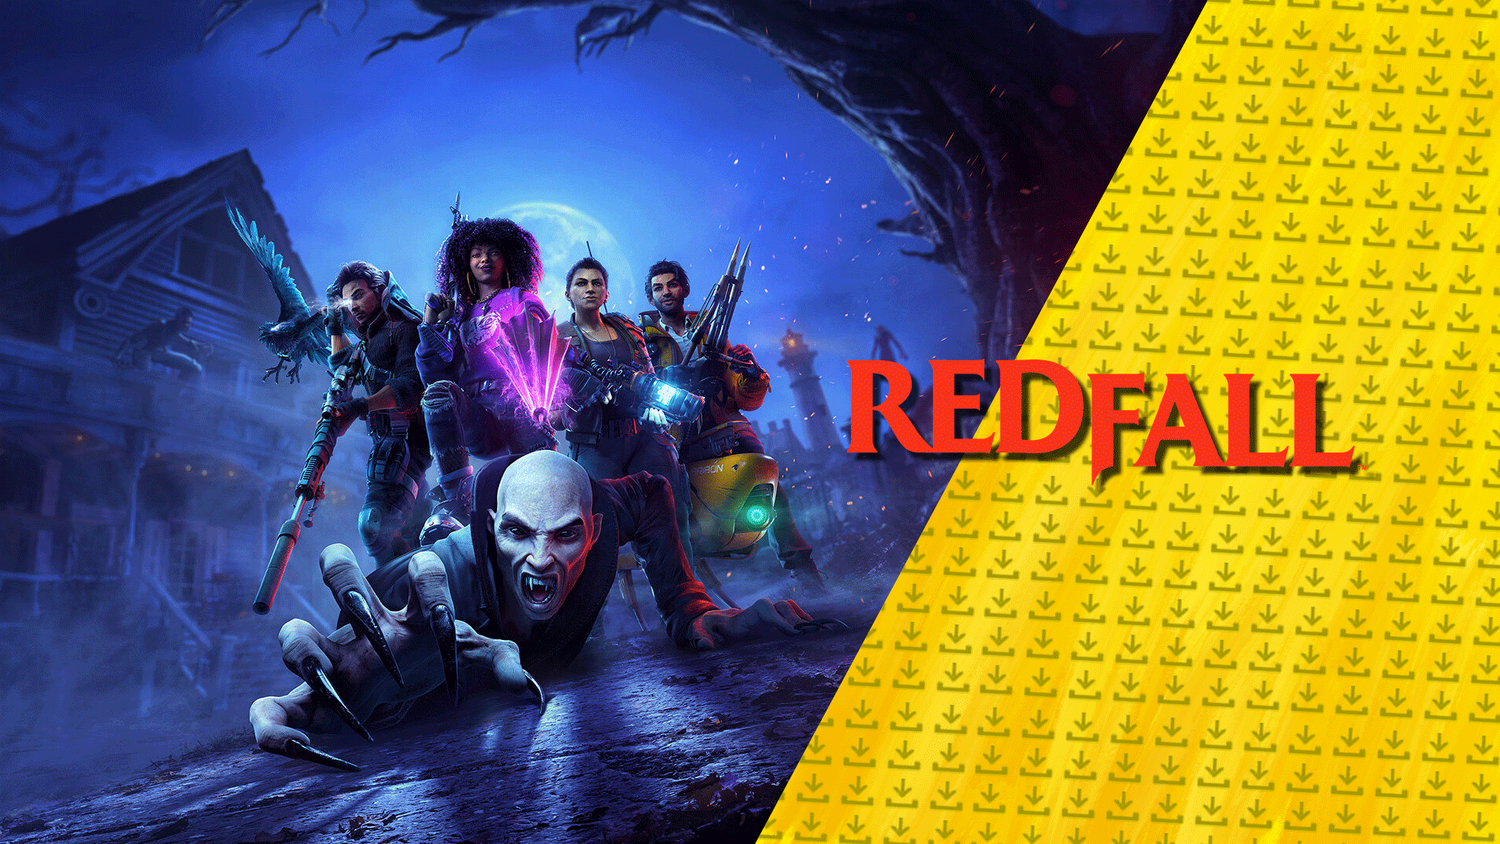 Redfall will have full crossplay between PC platforms and Xbox